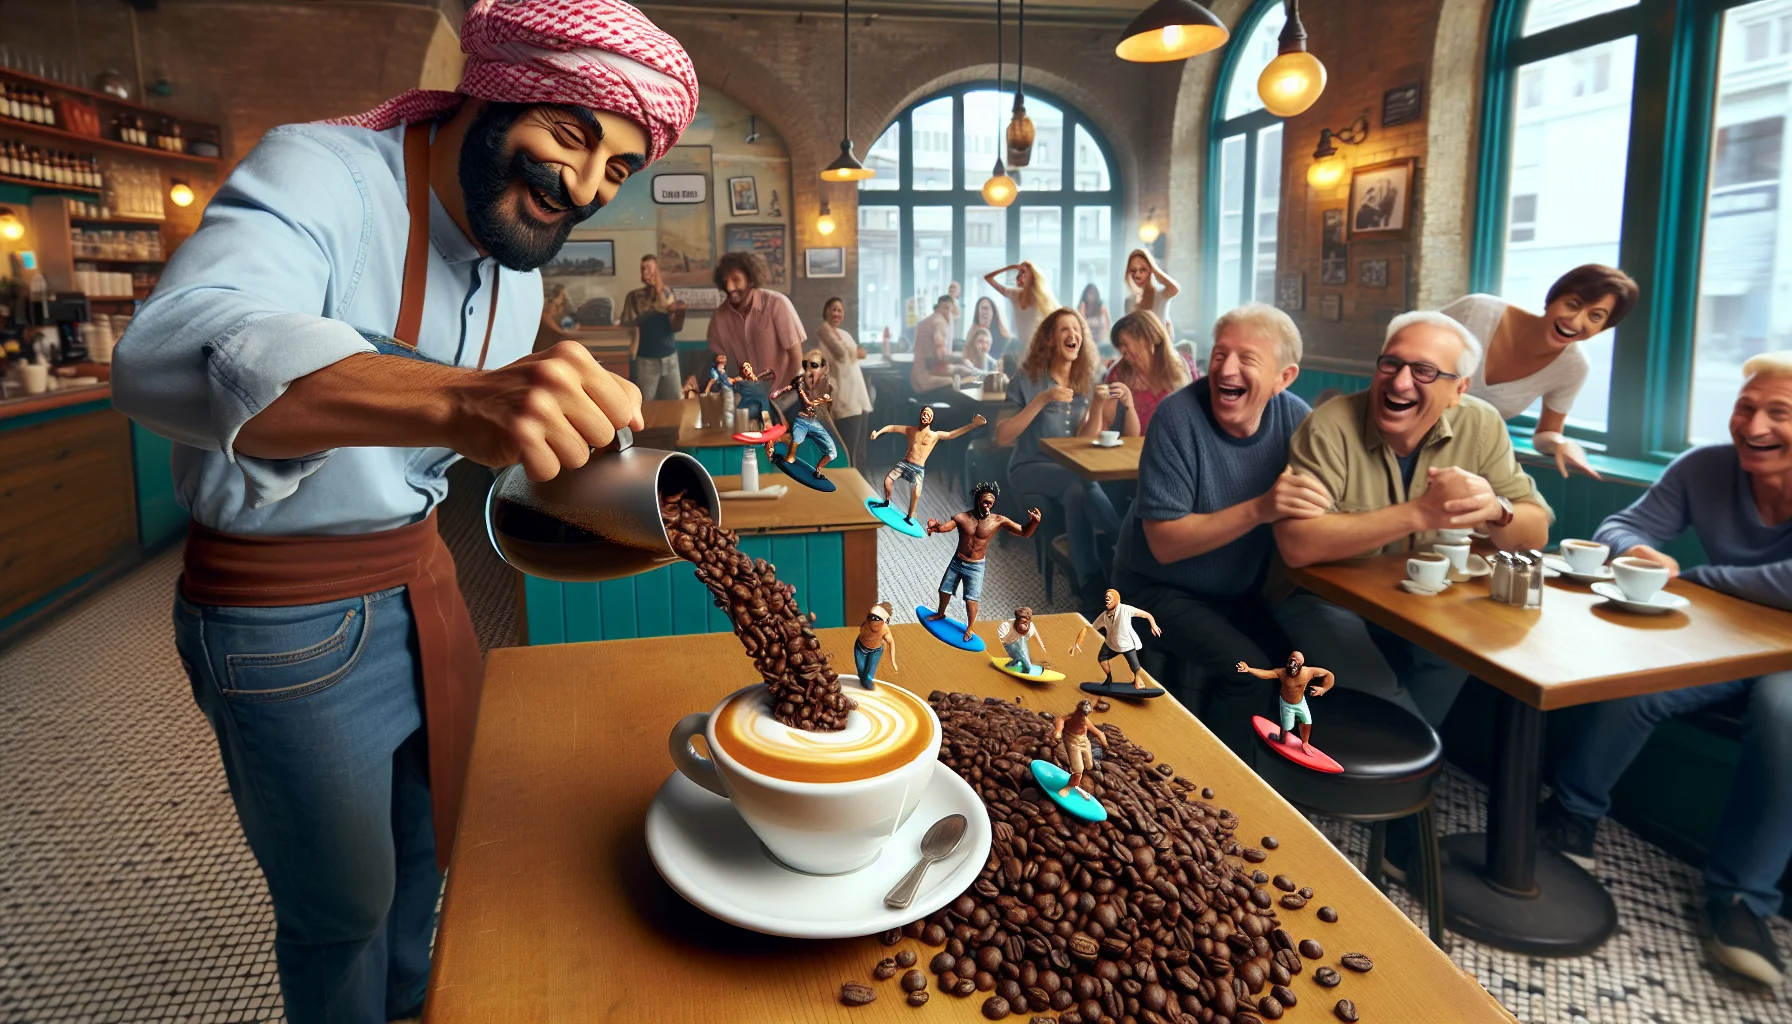 Imagine a humorous scene set in a bustling downtown café. The barista, a playful, Middle-Eastern man, is pouring a shot of hot beans espresso into a cup. Suddenly, the espresso turns into a group of miniature beans jovially surfing on the flow of the coffee. The patrons, a mix of Caucasian, Hispanic and Black men and women, watch in surprise and laughter as these surfing beans make their way into the cup. The tables, decorations, and atmosphere hint at a place perfect for fun and relaxation. The feeling entices people to enjoy their coffee.